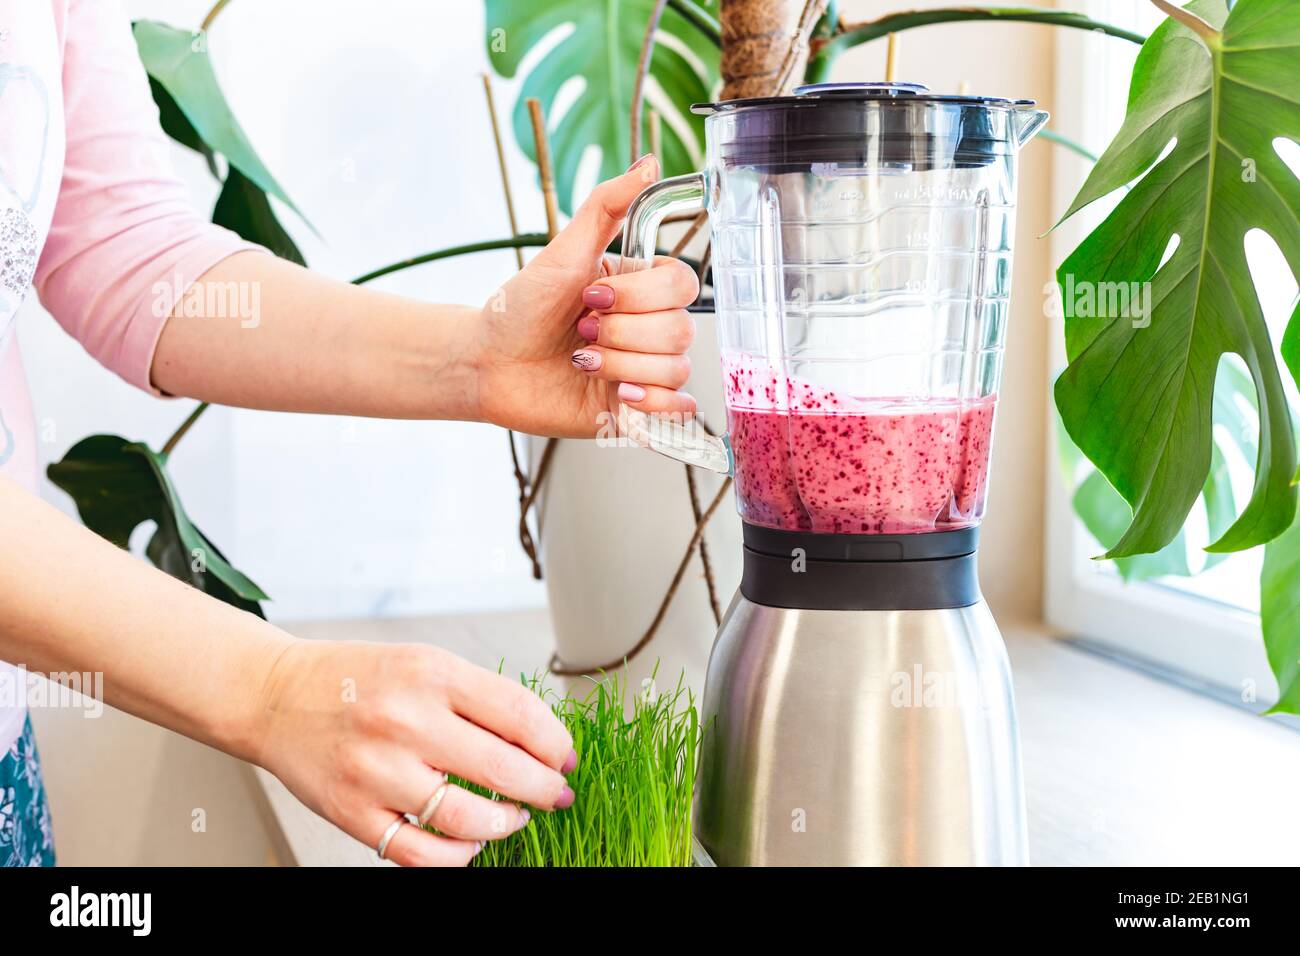 A woman mixes a delicious almond milk, berry and herbs smoothie in a blender. Stock Photo